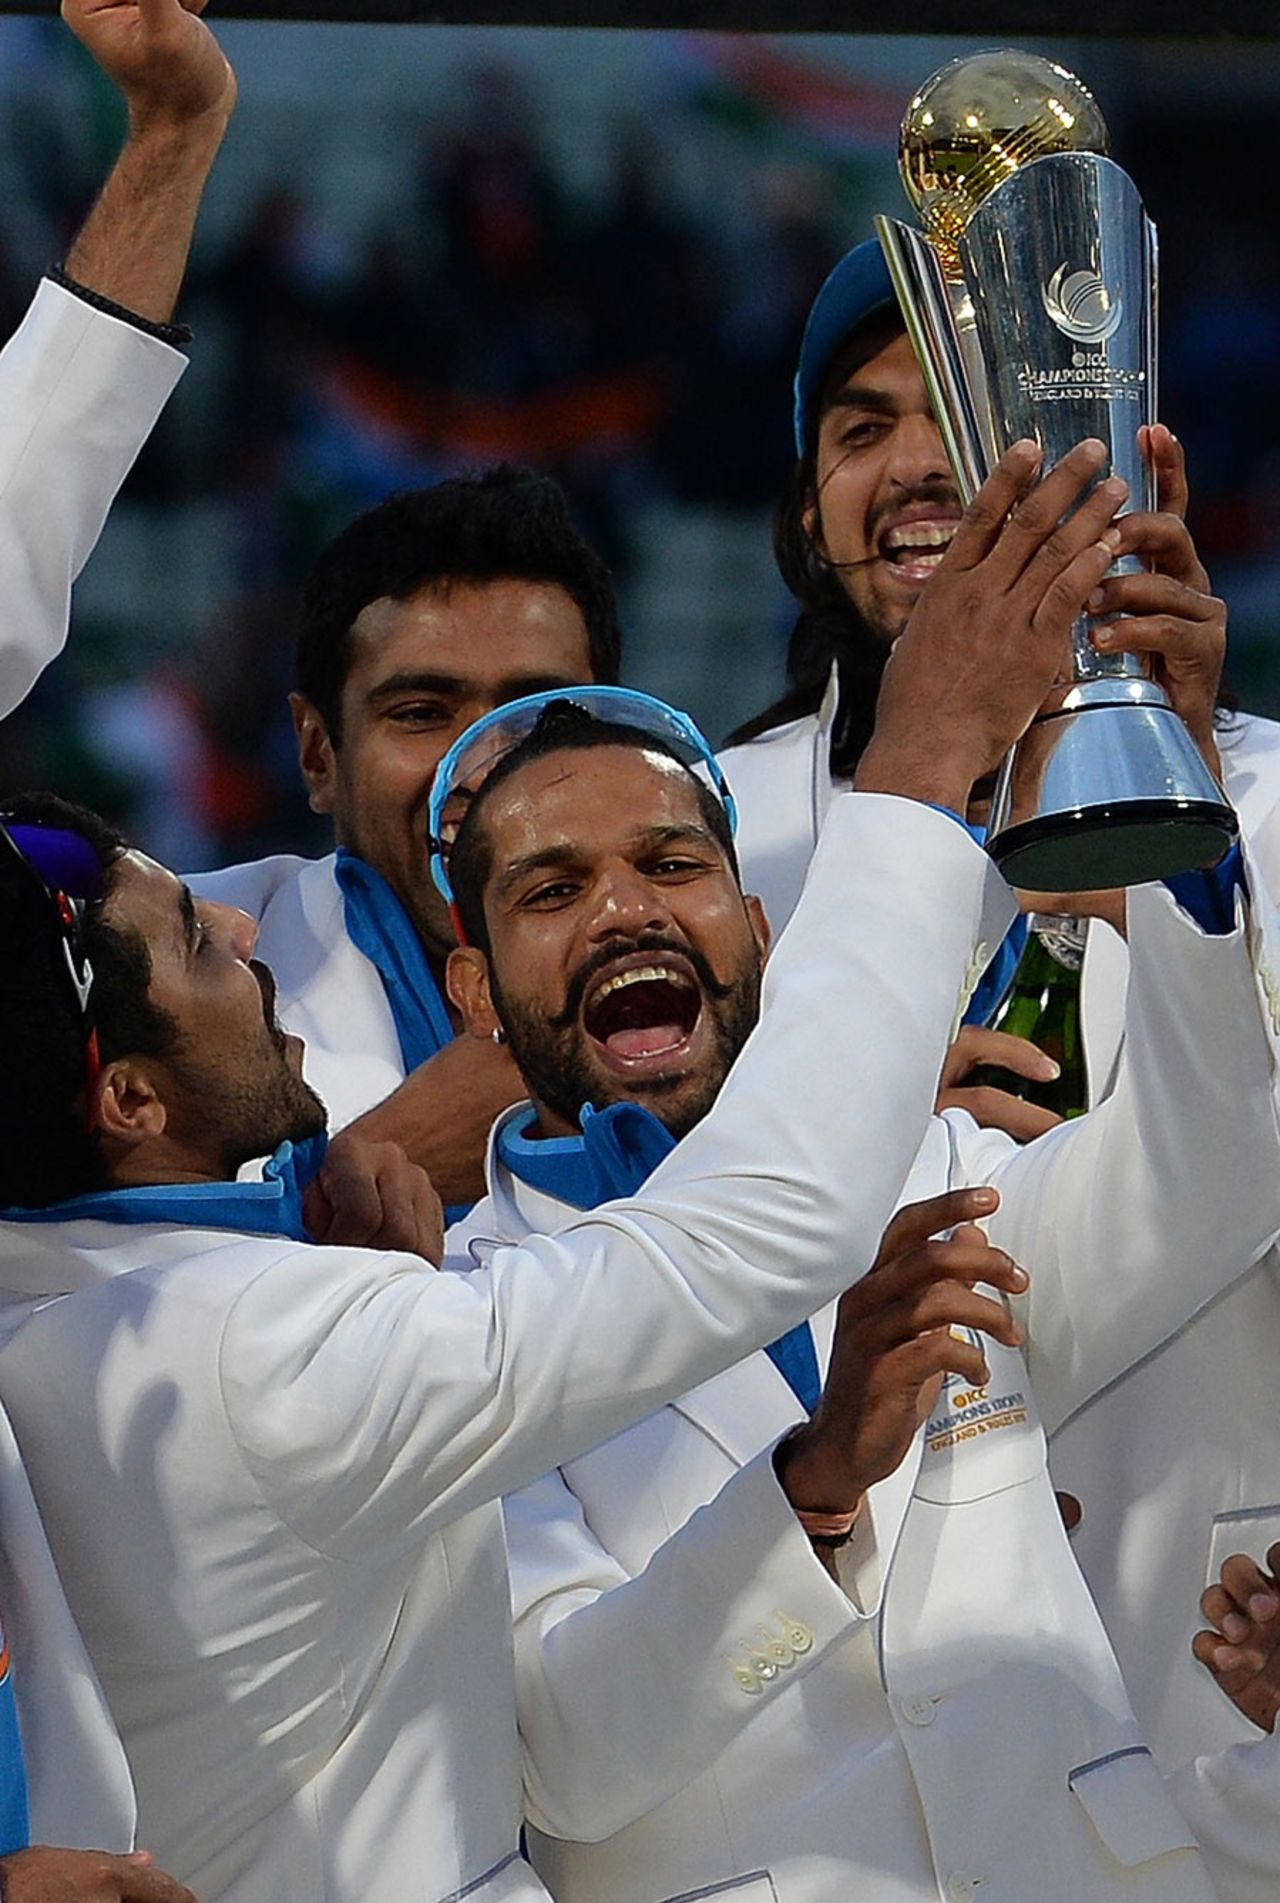 Shikhar Dhawan was named player of the tournament and won the golden bat, England v India, Champions Trophy final, Edgbaston, June 23, 2013